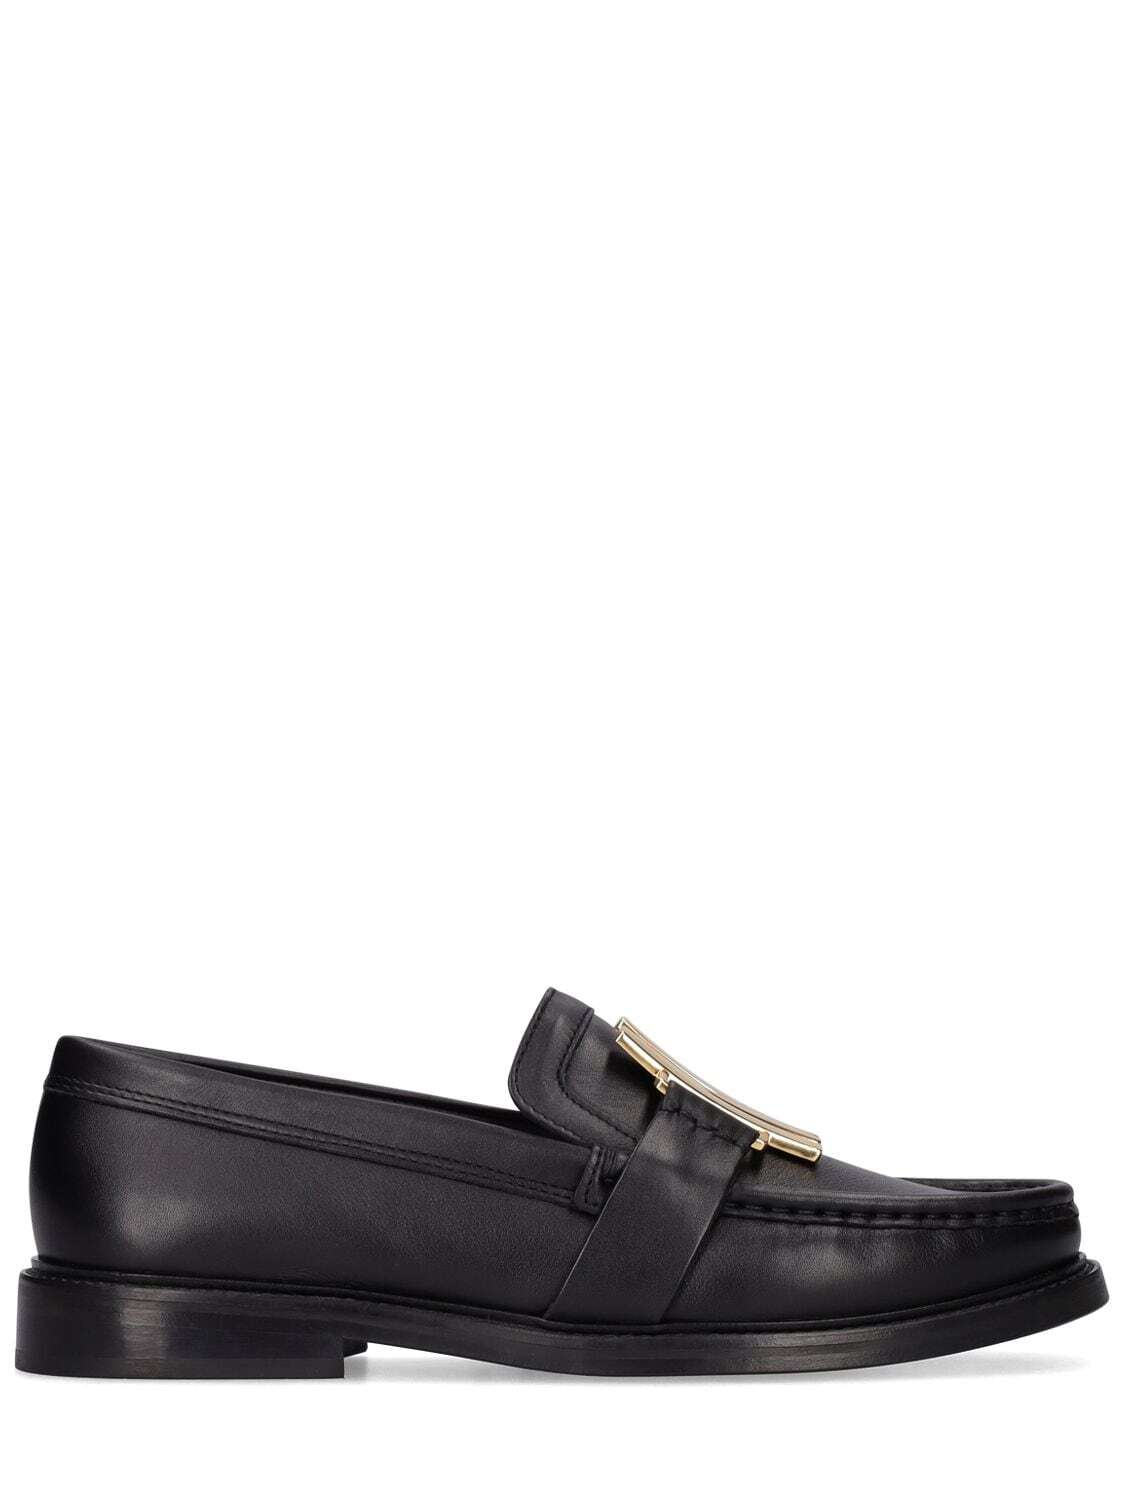 MOSCHINO 25mm M Stud Leather Loafers in black